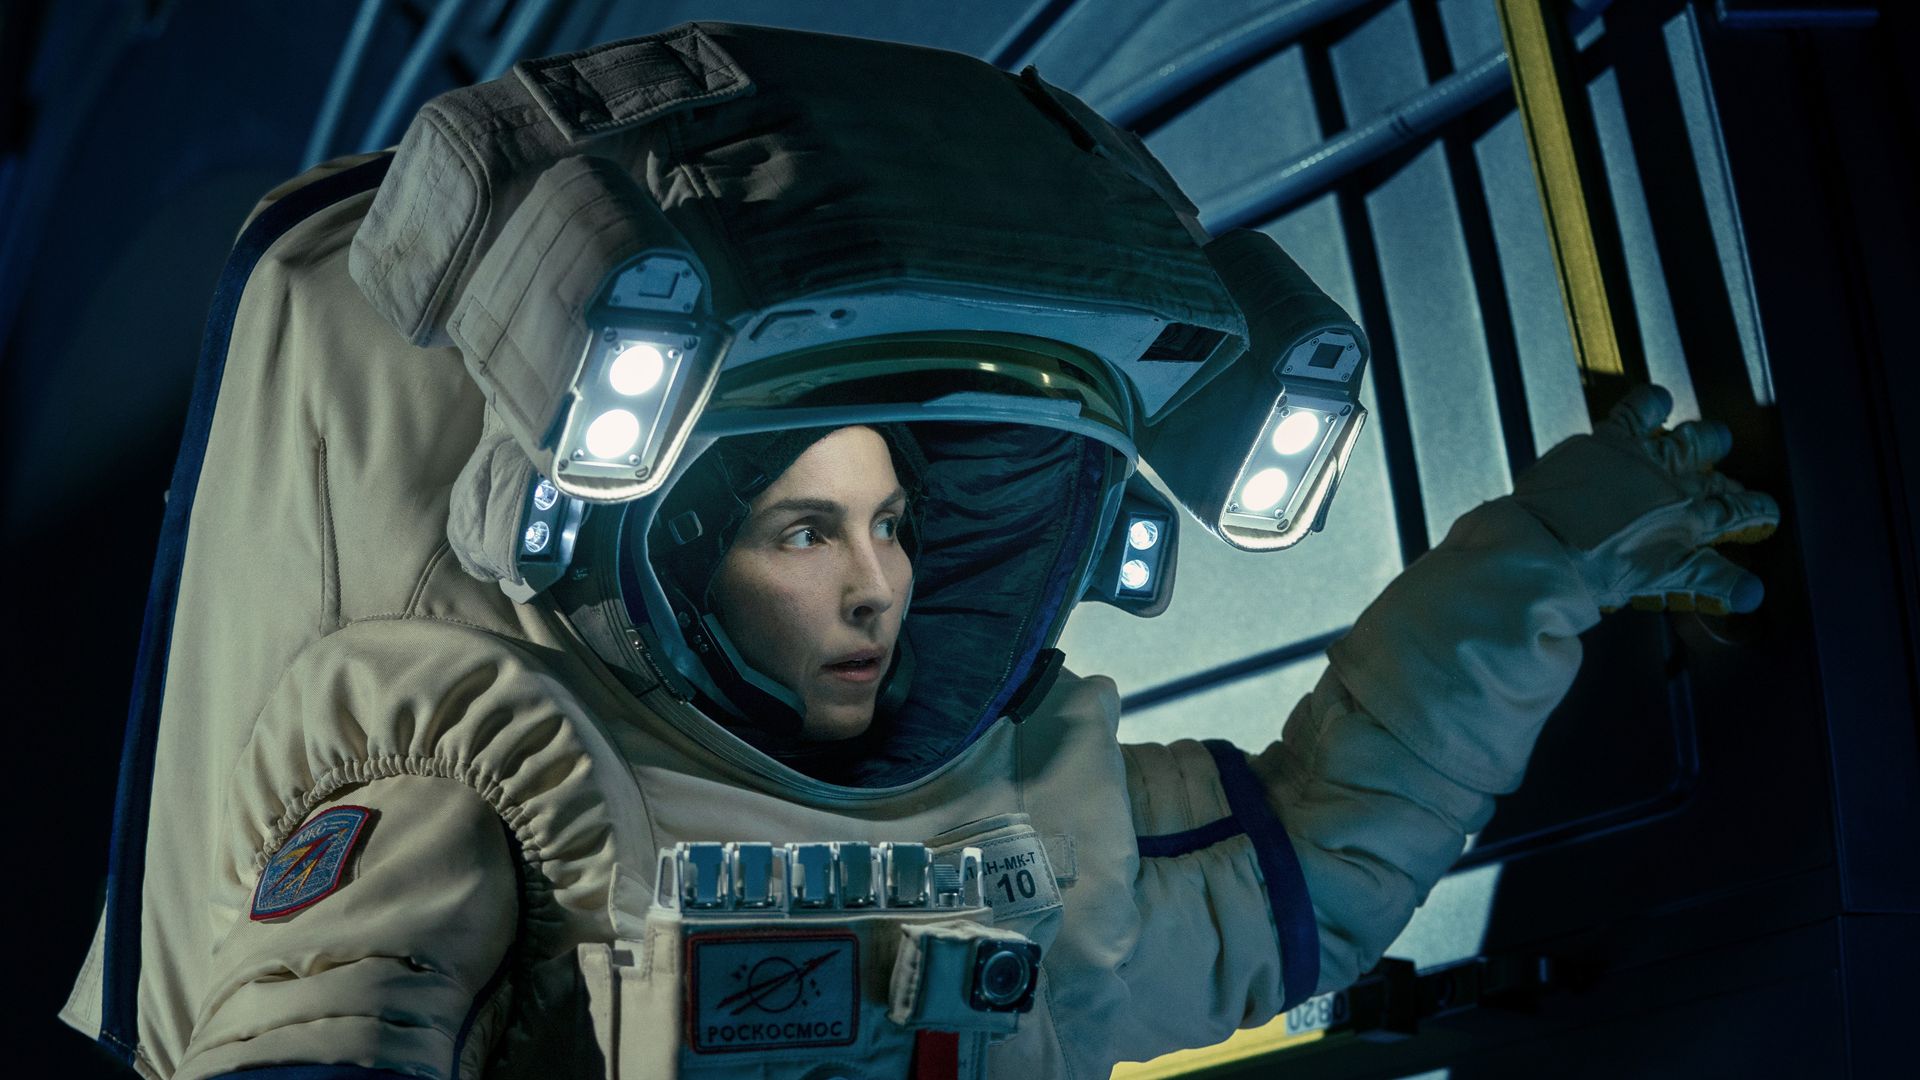 Noomi Rapace in Constellation